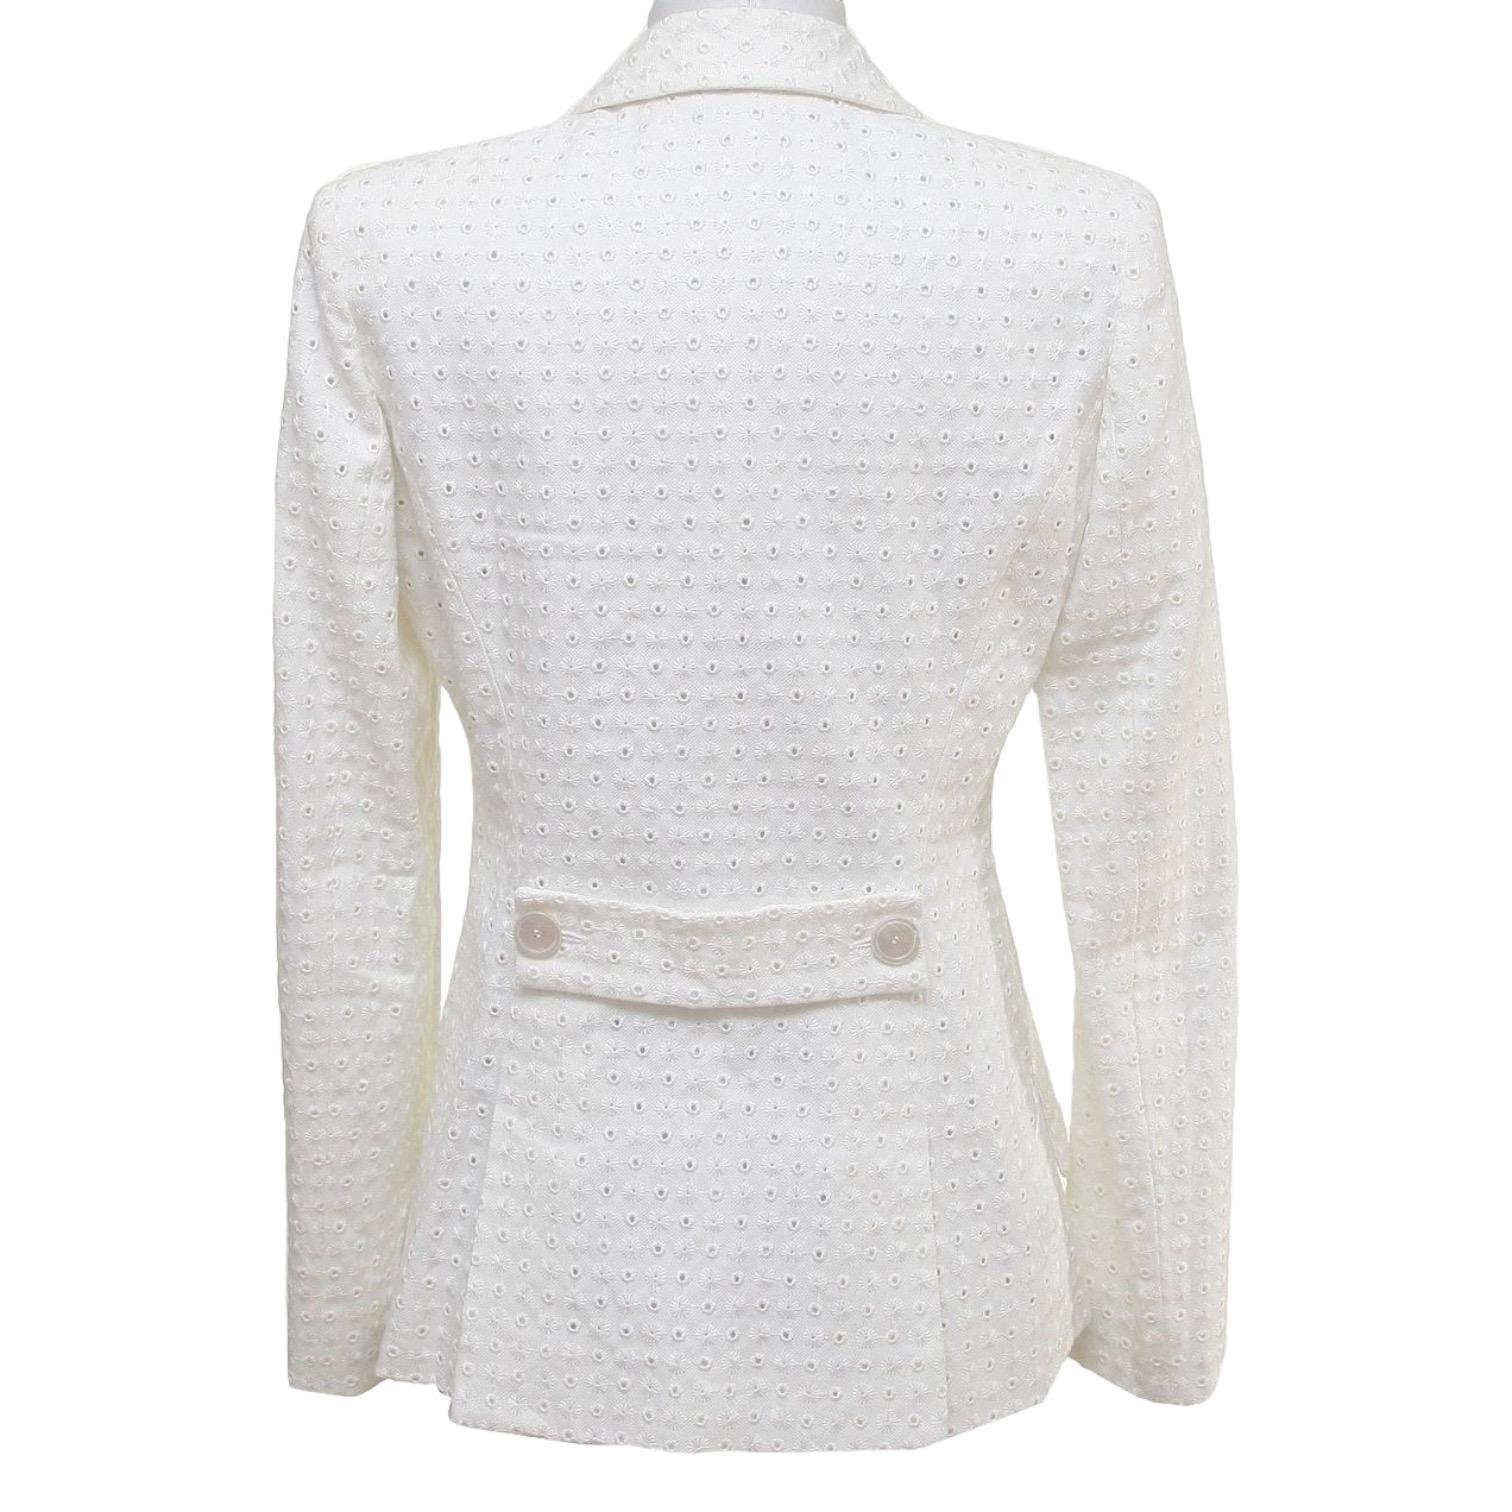 Valentino White Blazer Jacket Eyelet Cotton Viscose Long Sleeve Lined Sz 4 In Good Condition For Sale In Hollywood, FL